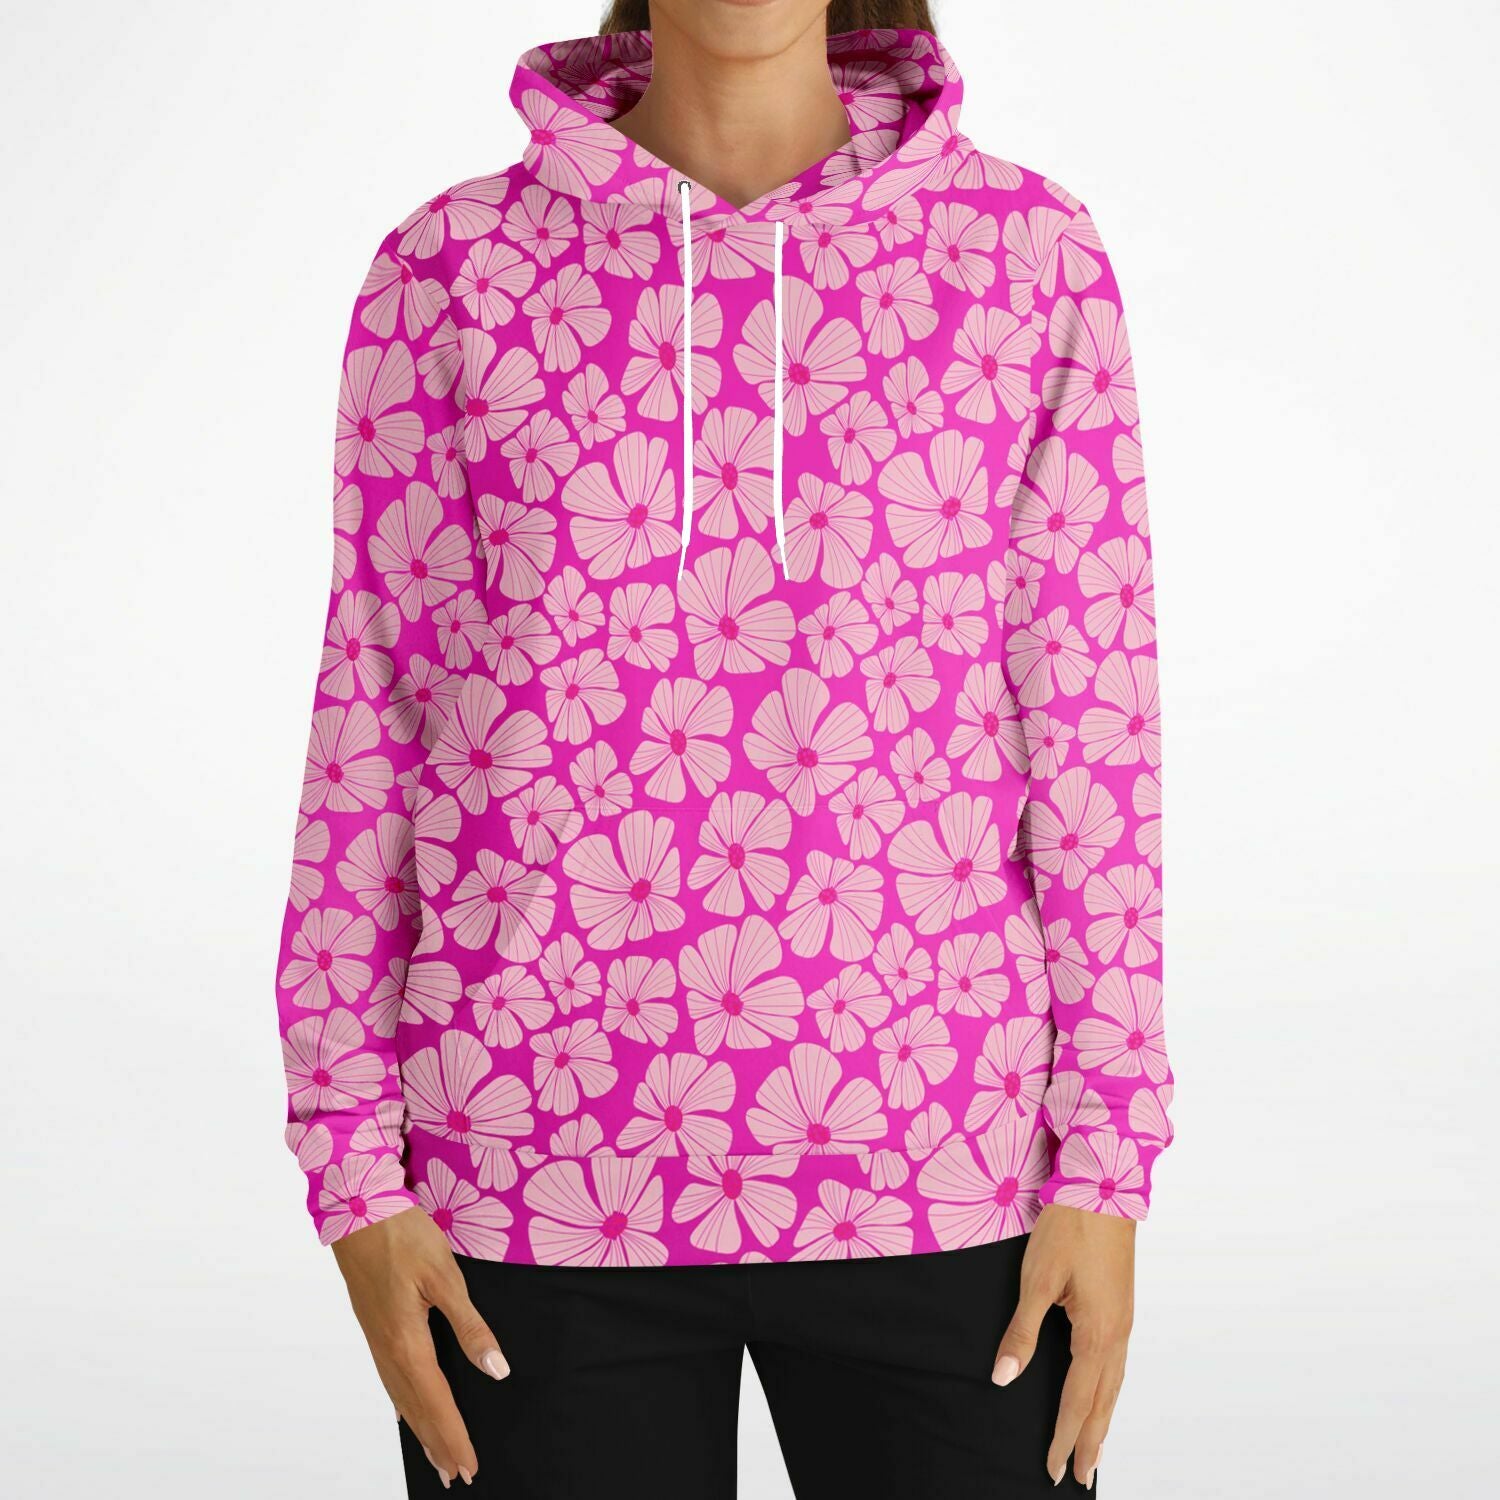 fashion hot pink hoodie with retro flowers print